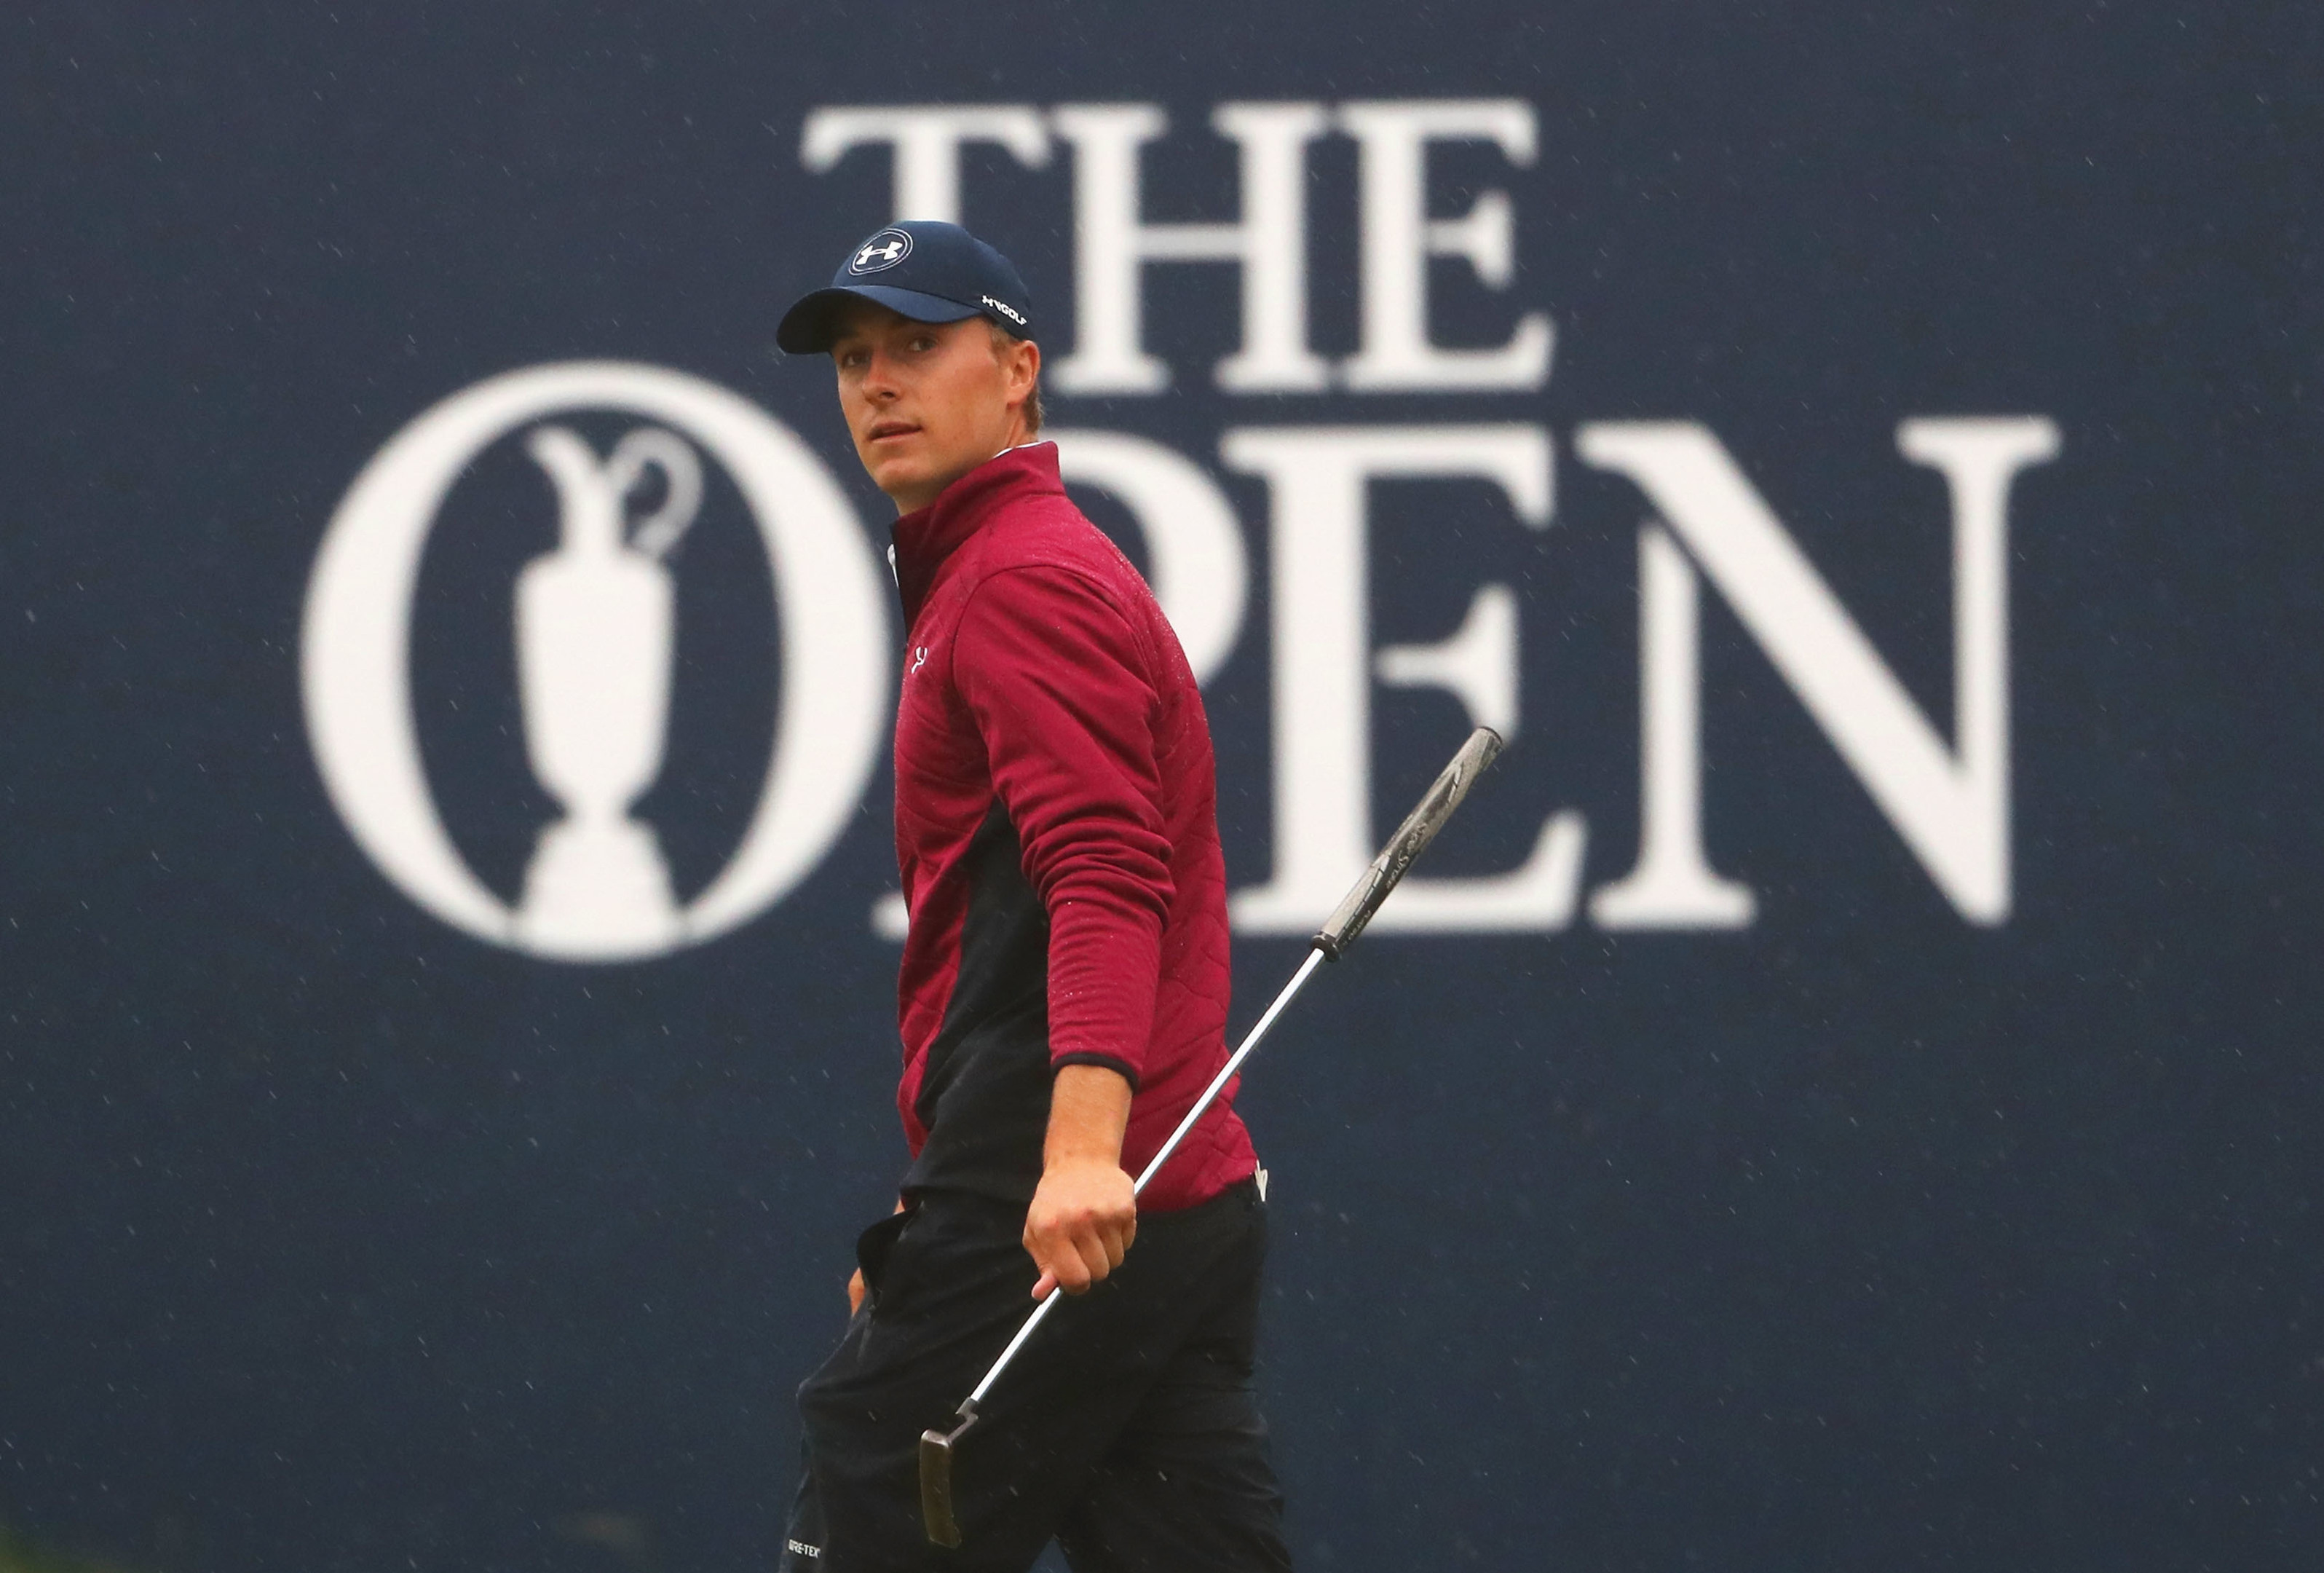 Jordan Spieth will defend his Open title at Carnoustie in July.